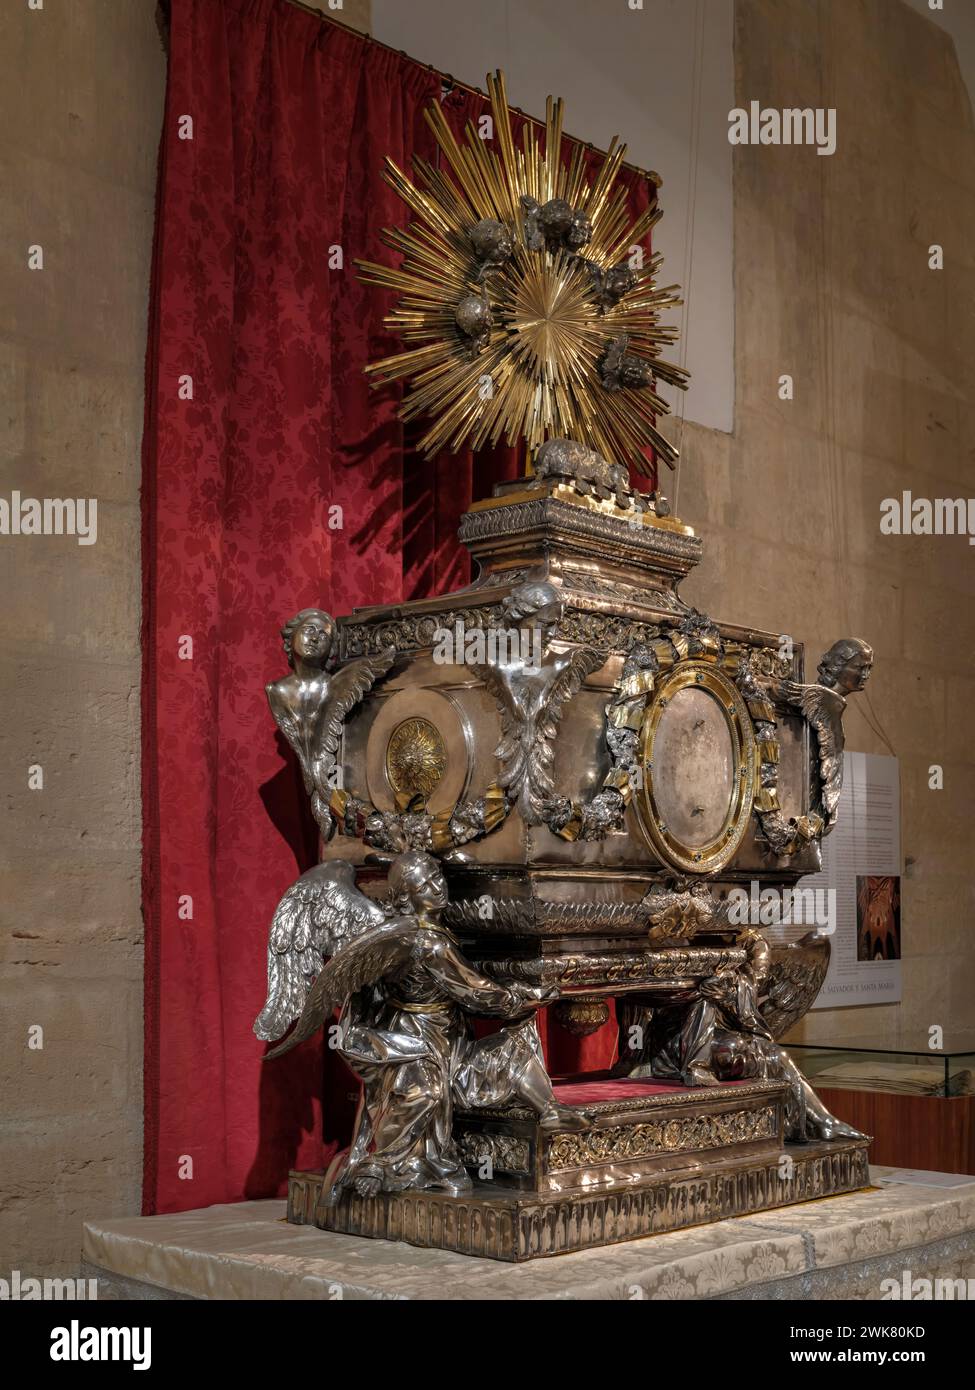 One of the beautifully ornate religious artifacts, the  'Monument of Holy Thursday',  on display in the cathedral in Orihuela, Alicante, Spain. Stock Photo